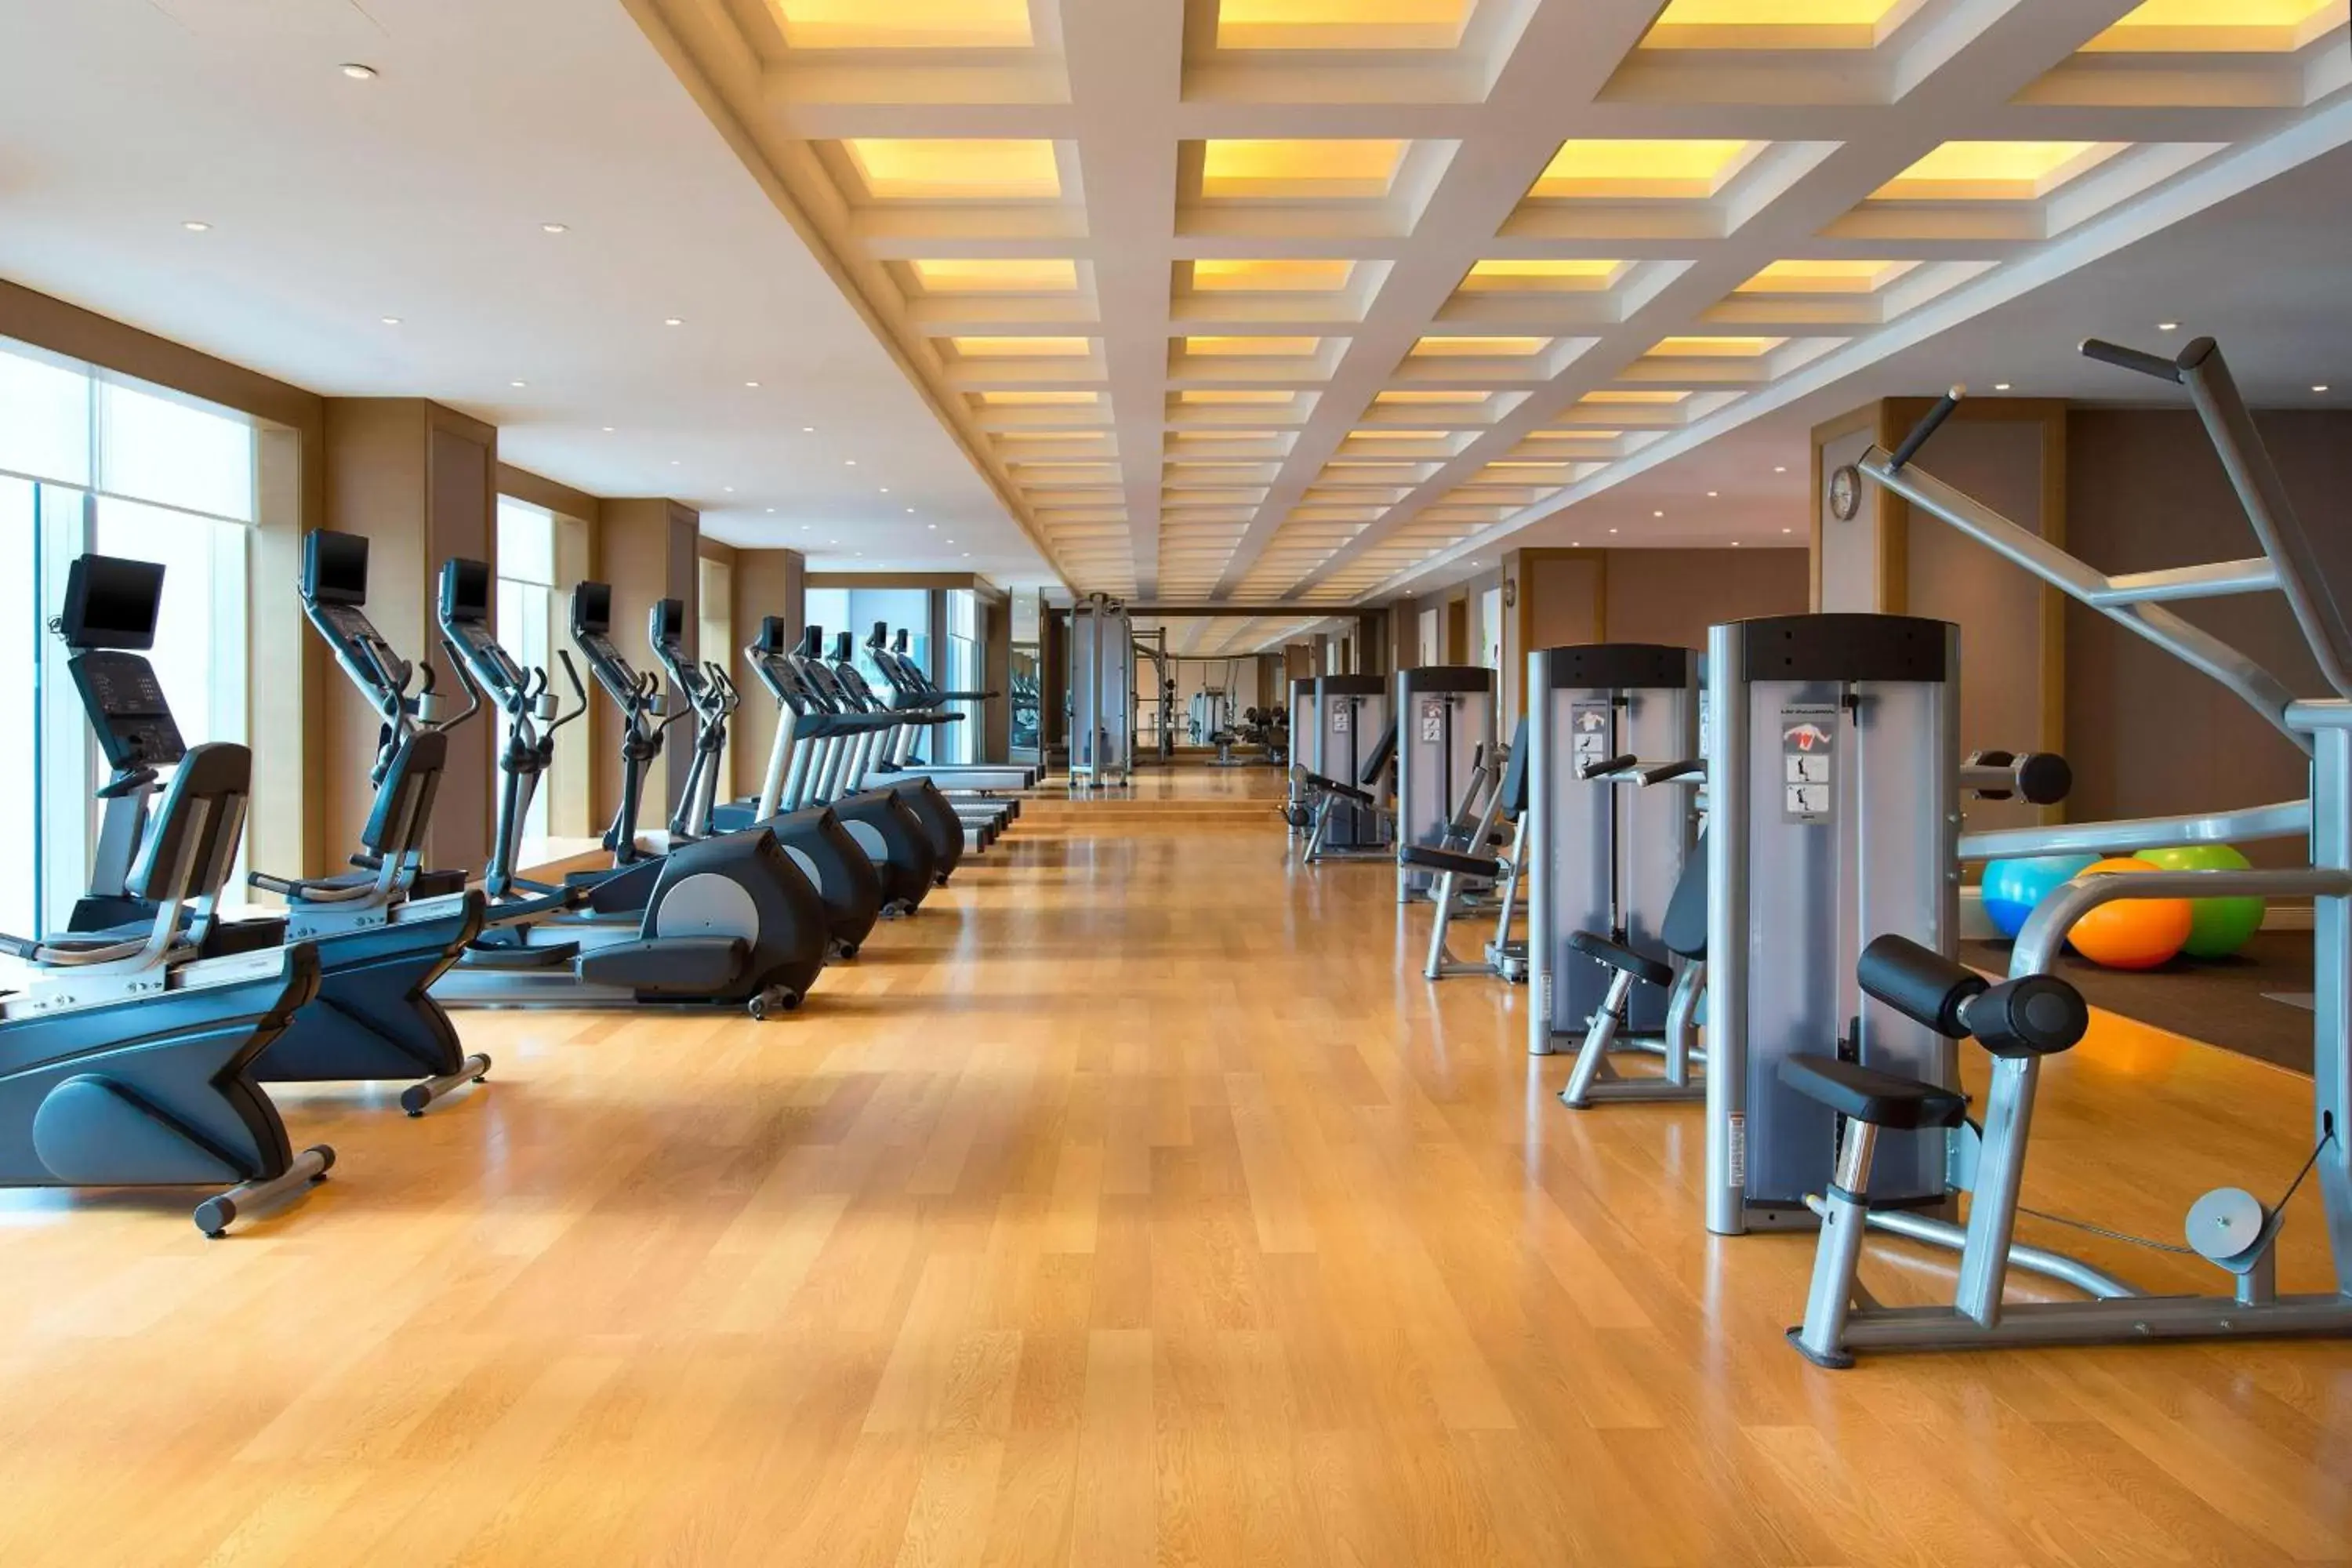 Fitness centre/facilities, Fitness Center/Facilities in The Westin Qingdao - Instagrammable